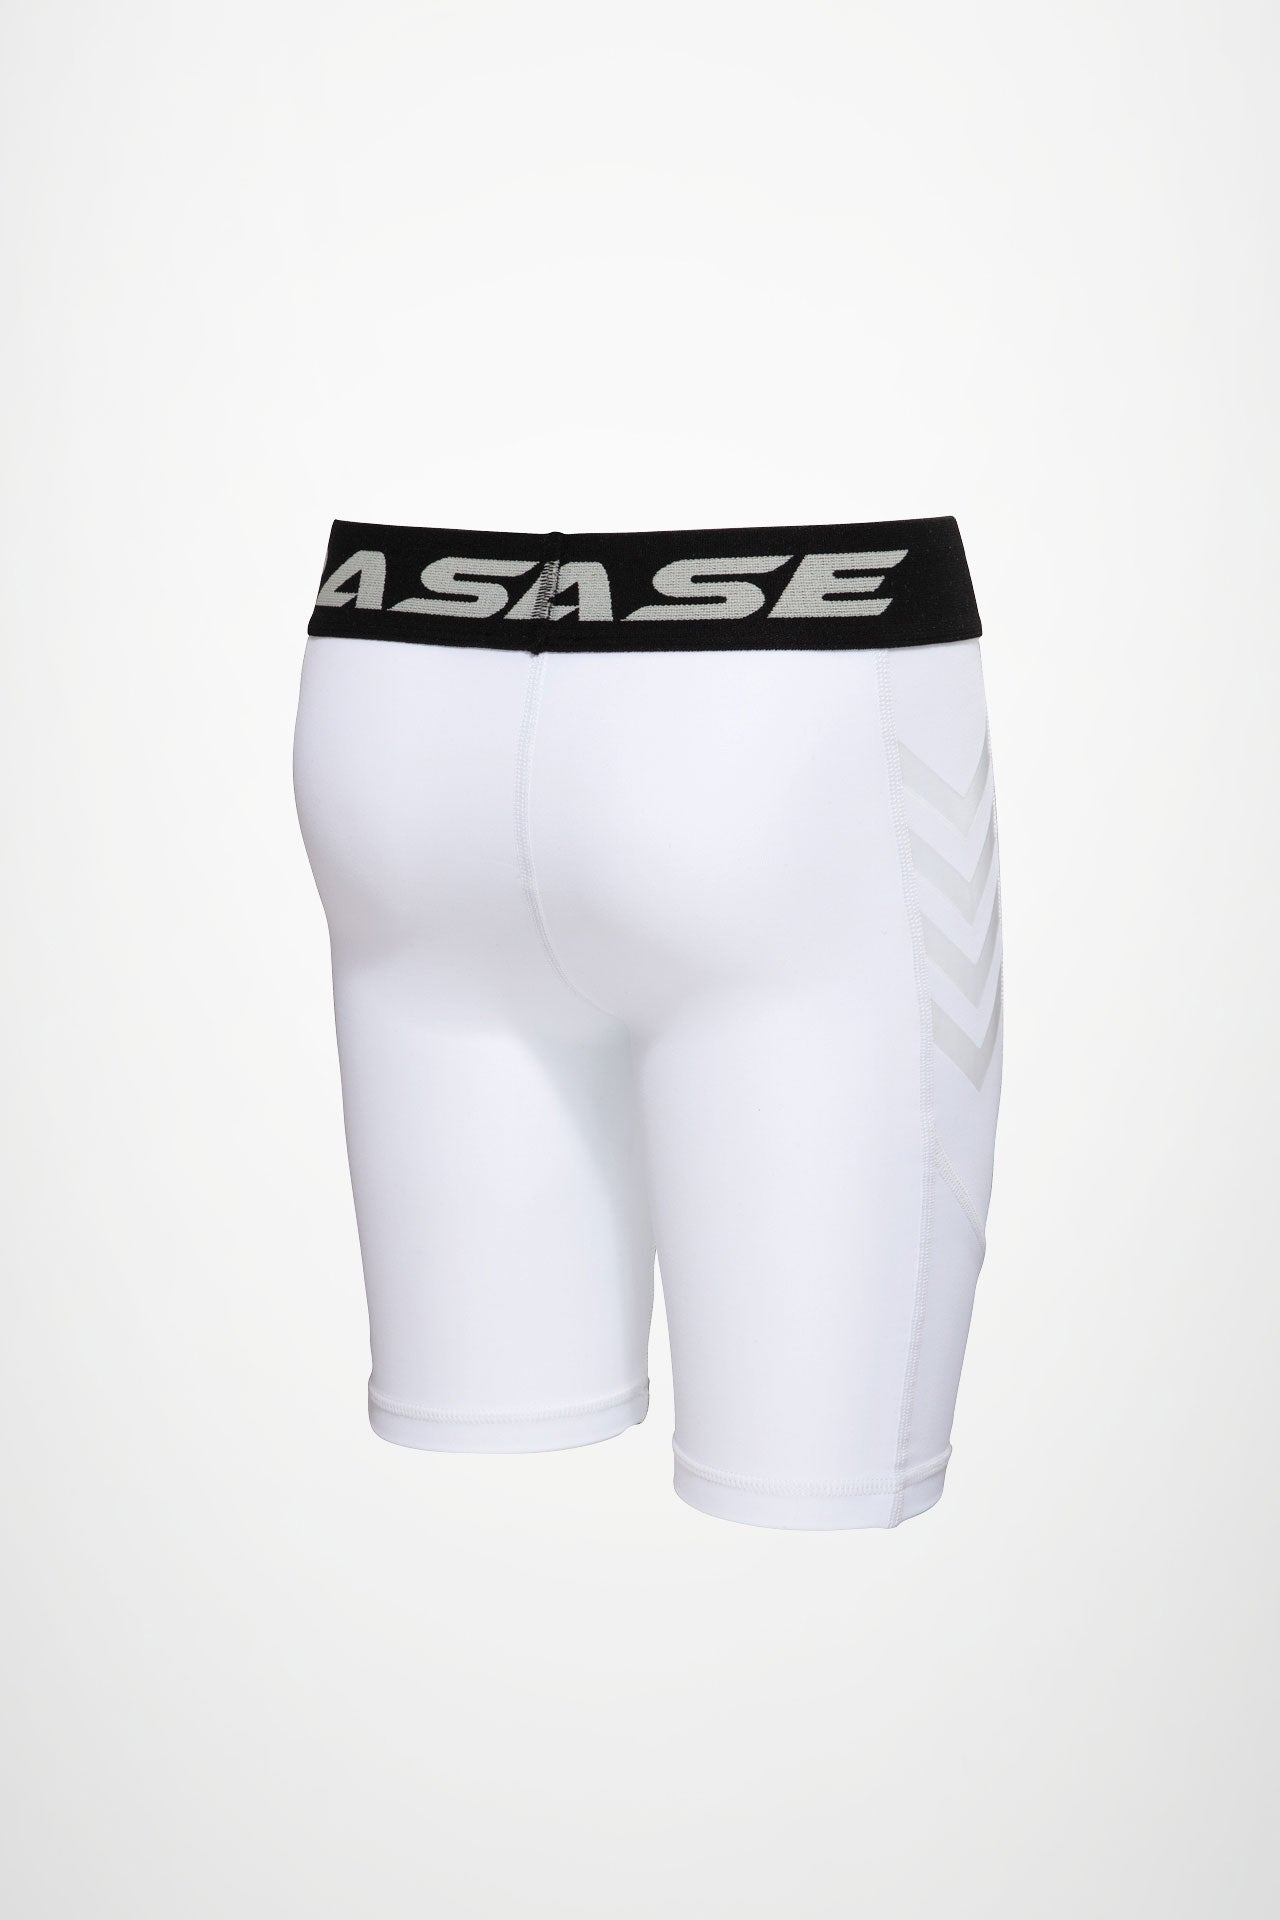 BASE Youth Compression Shorts - White - back view